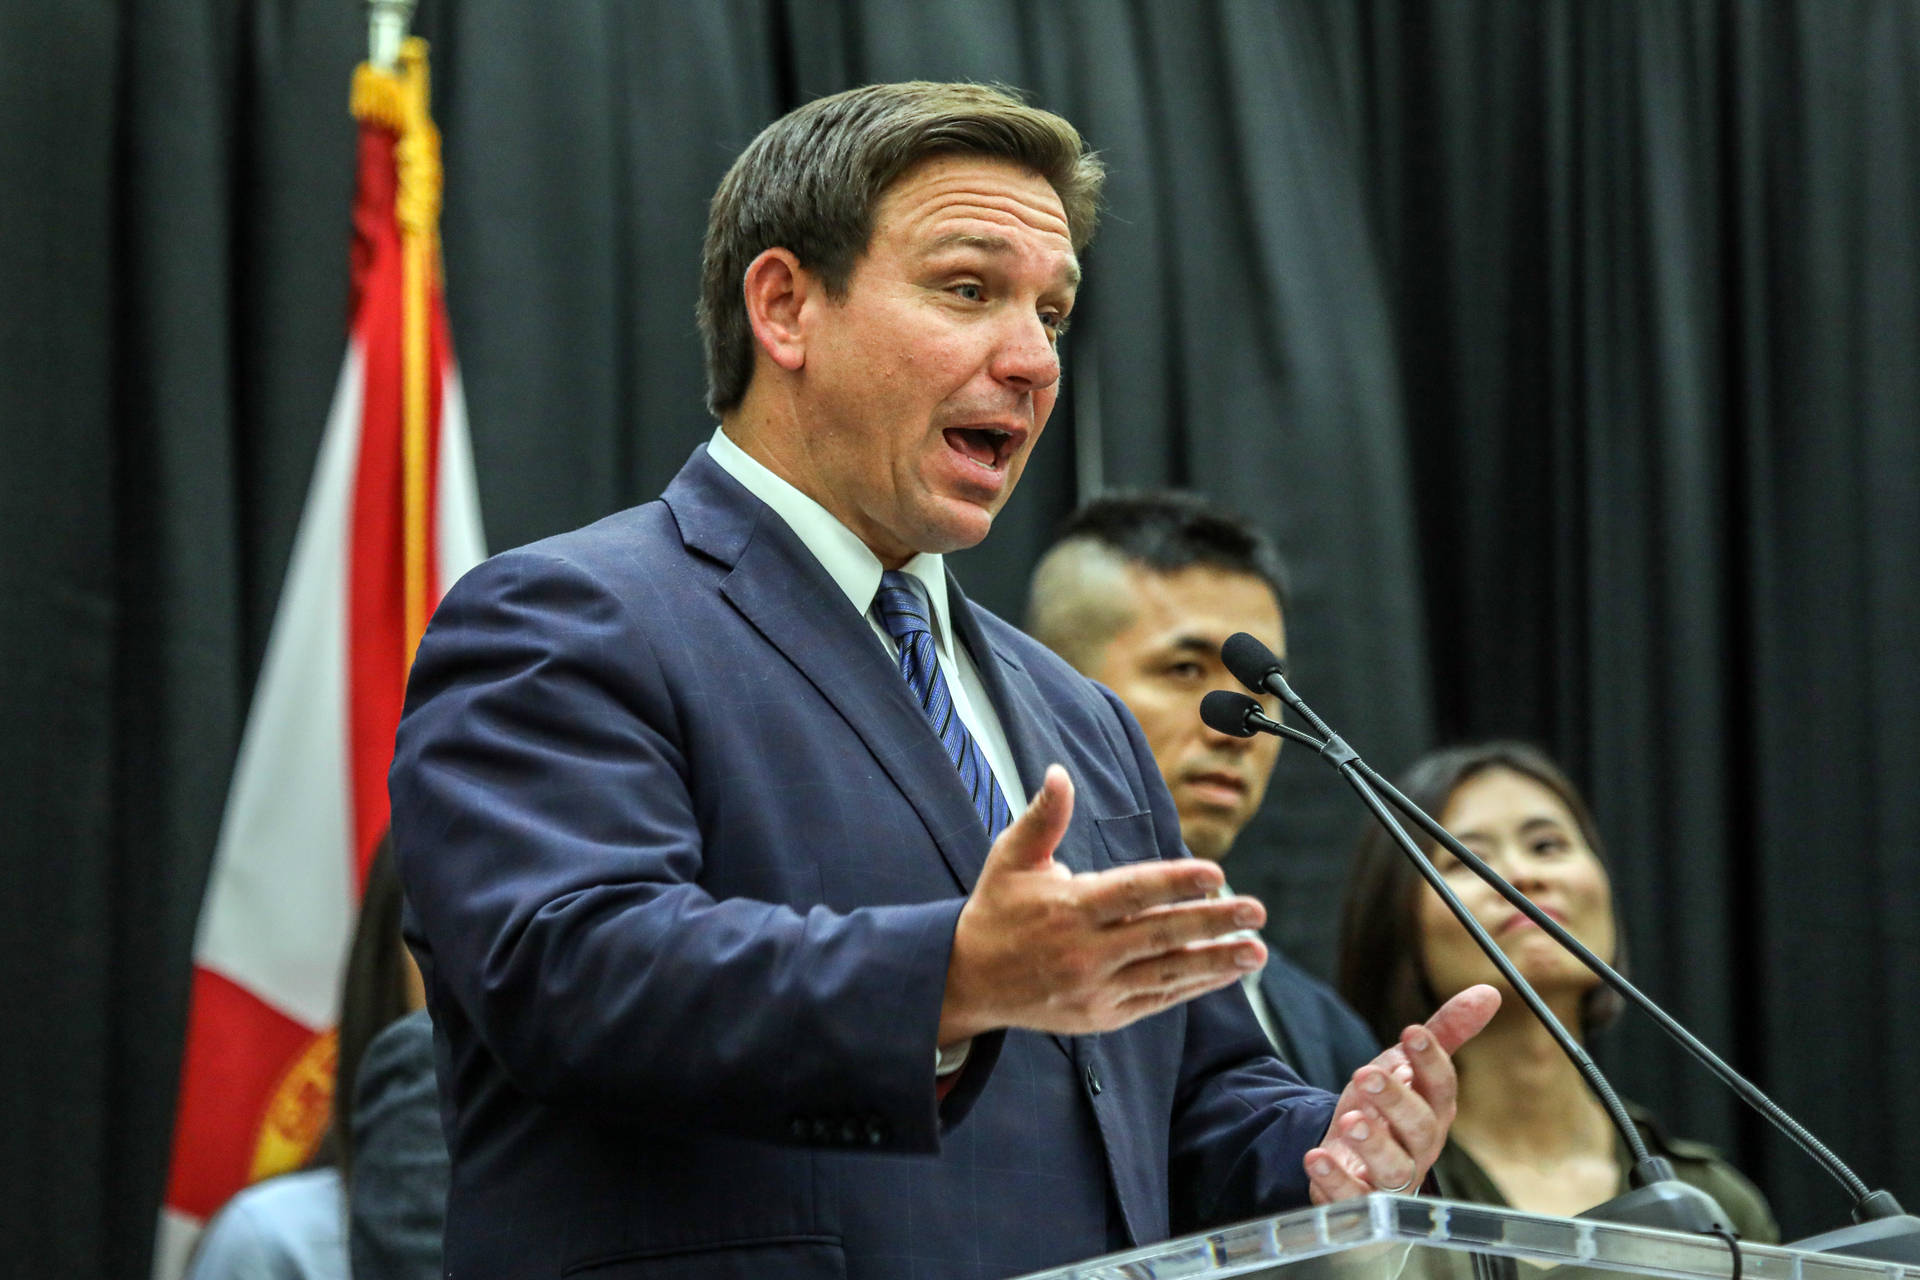 Ukraine invites Ron DeSantis to visit the country to understand the Russian invasion